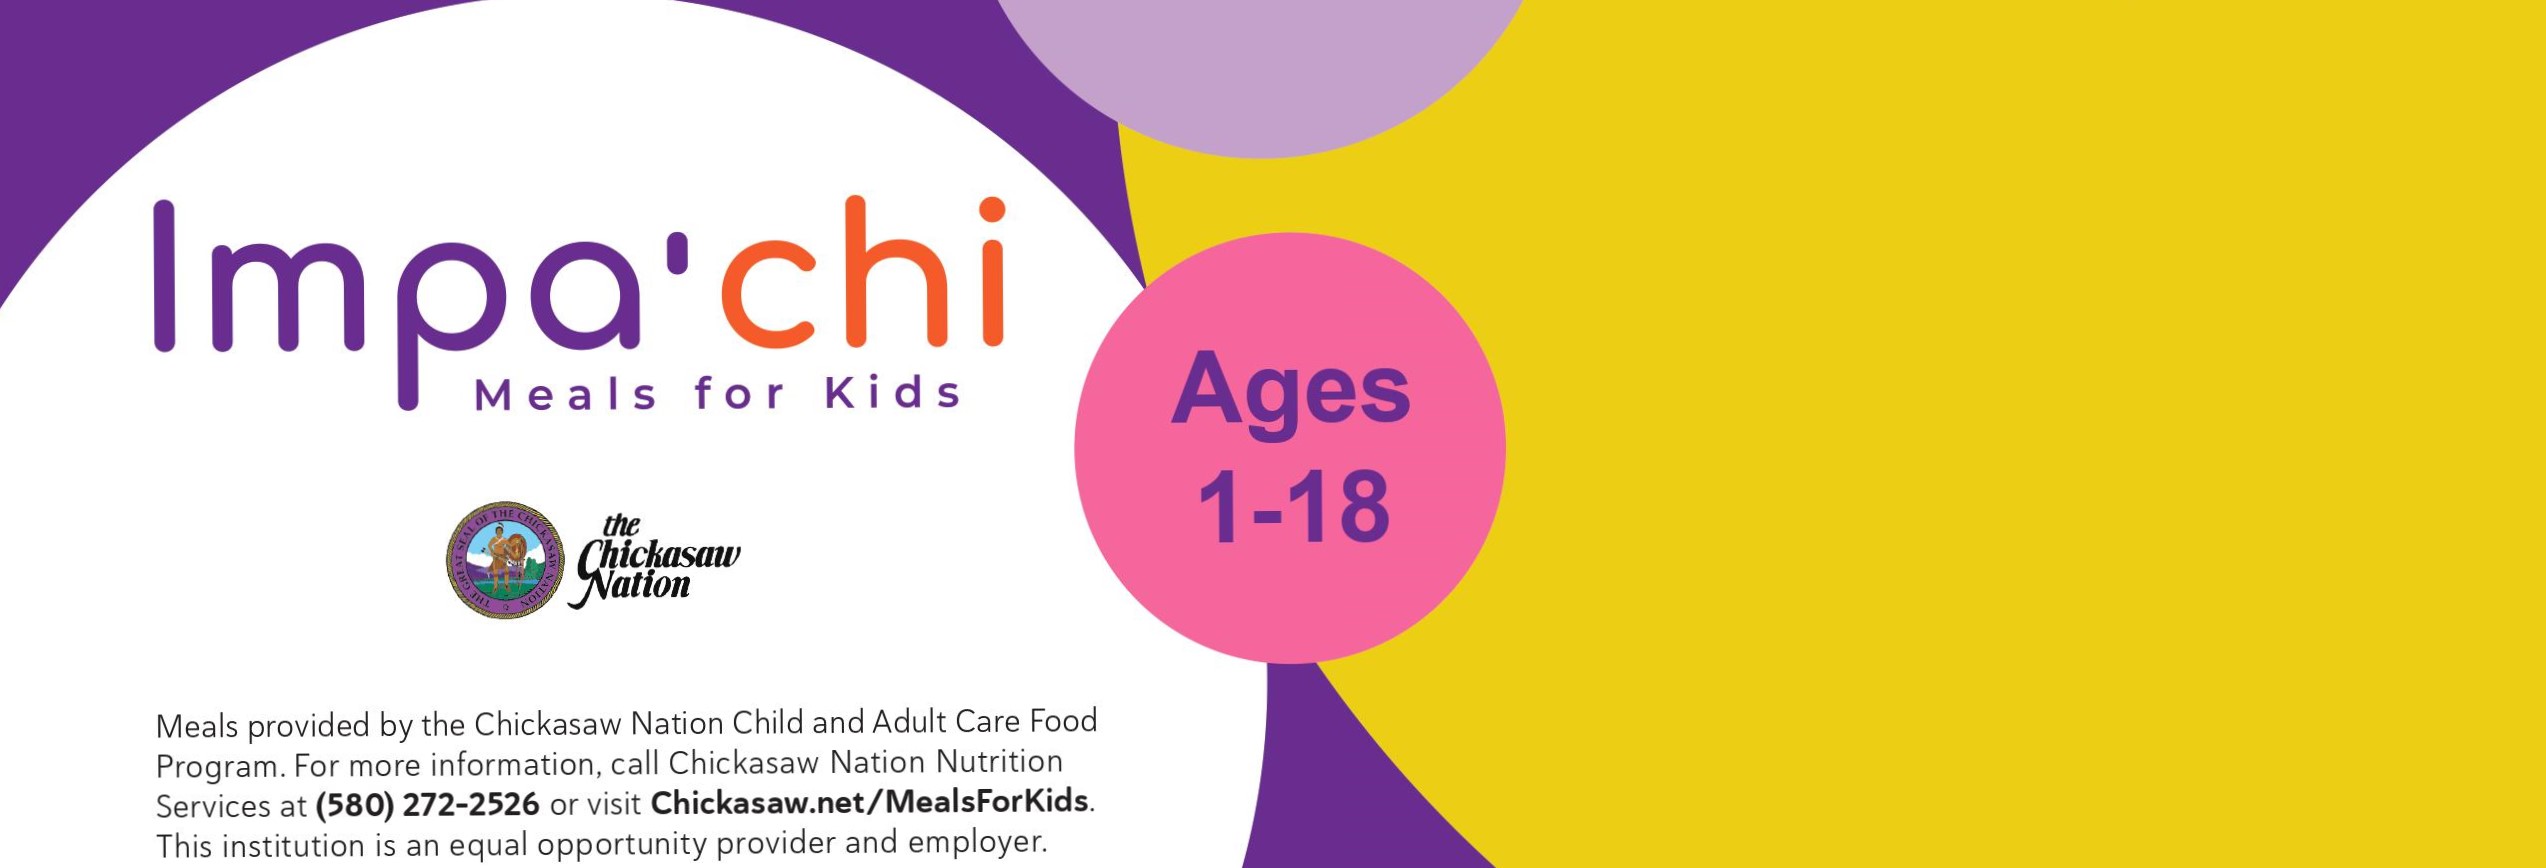 image is the logo for the Impa'chi meal program through the Chickasaw Nation with a pink bubble indicating ages 1 through 18, as well as a yellow blank area